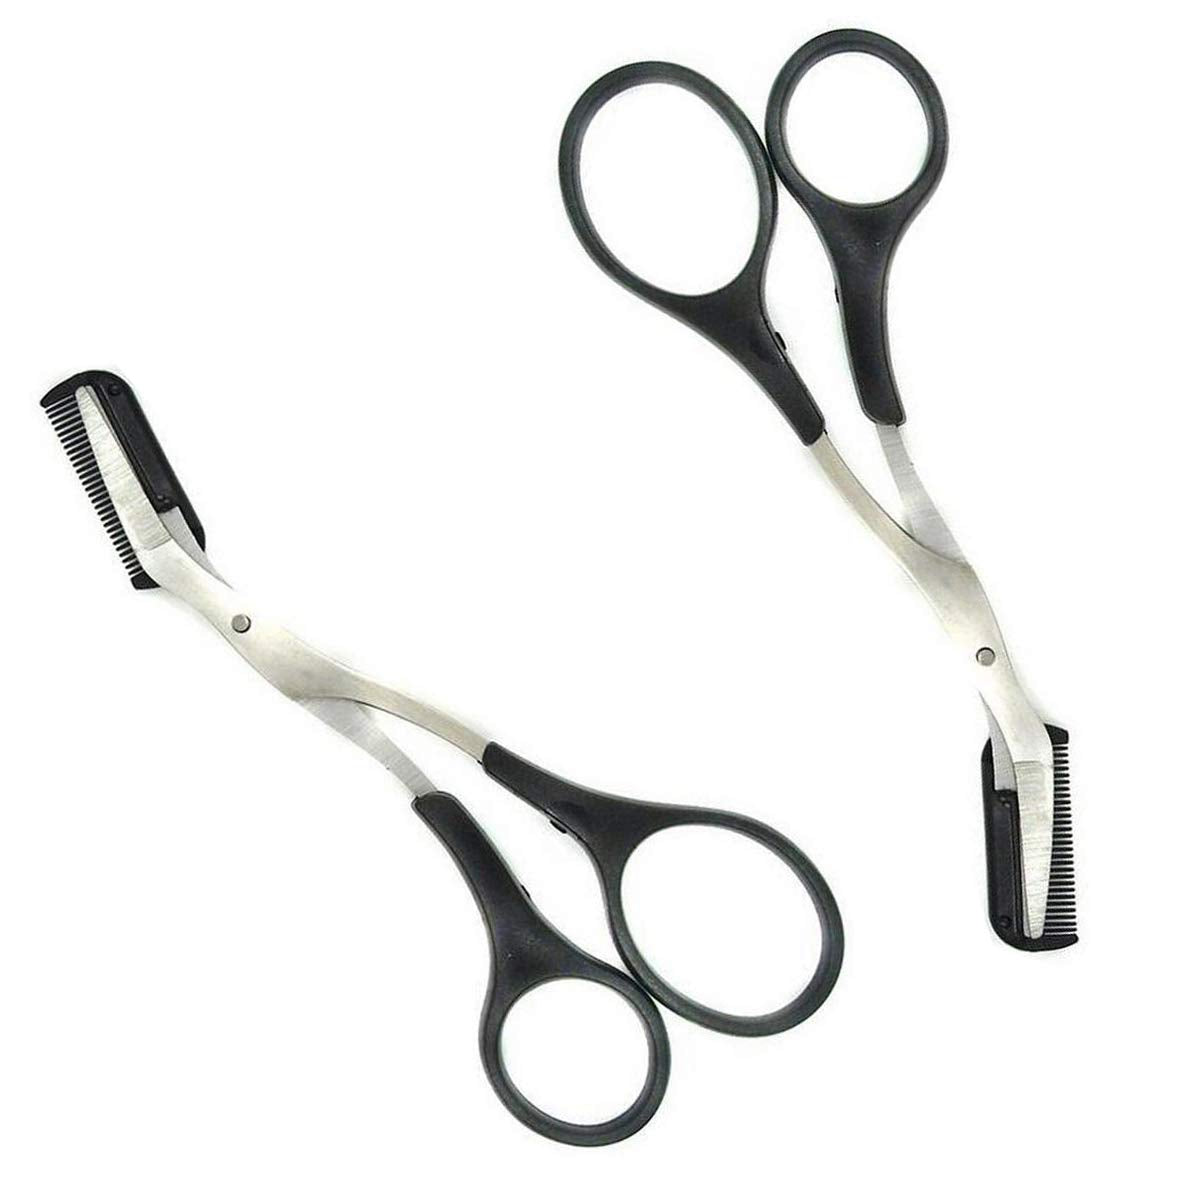 2Pcs Curved Eyebrow Trimmer Eyebrow Shear Scissors Eyelash Hair Scissors Cutter Remover Tool Eyebrow Grooming Tool With Comb and Non Slip Finger Grips for Women Men Makeup Eyebrow Eyelash Trimming